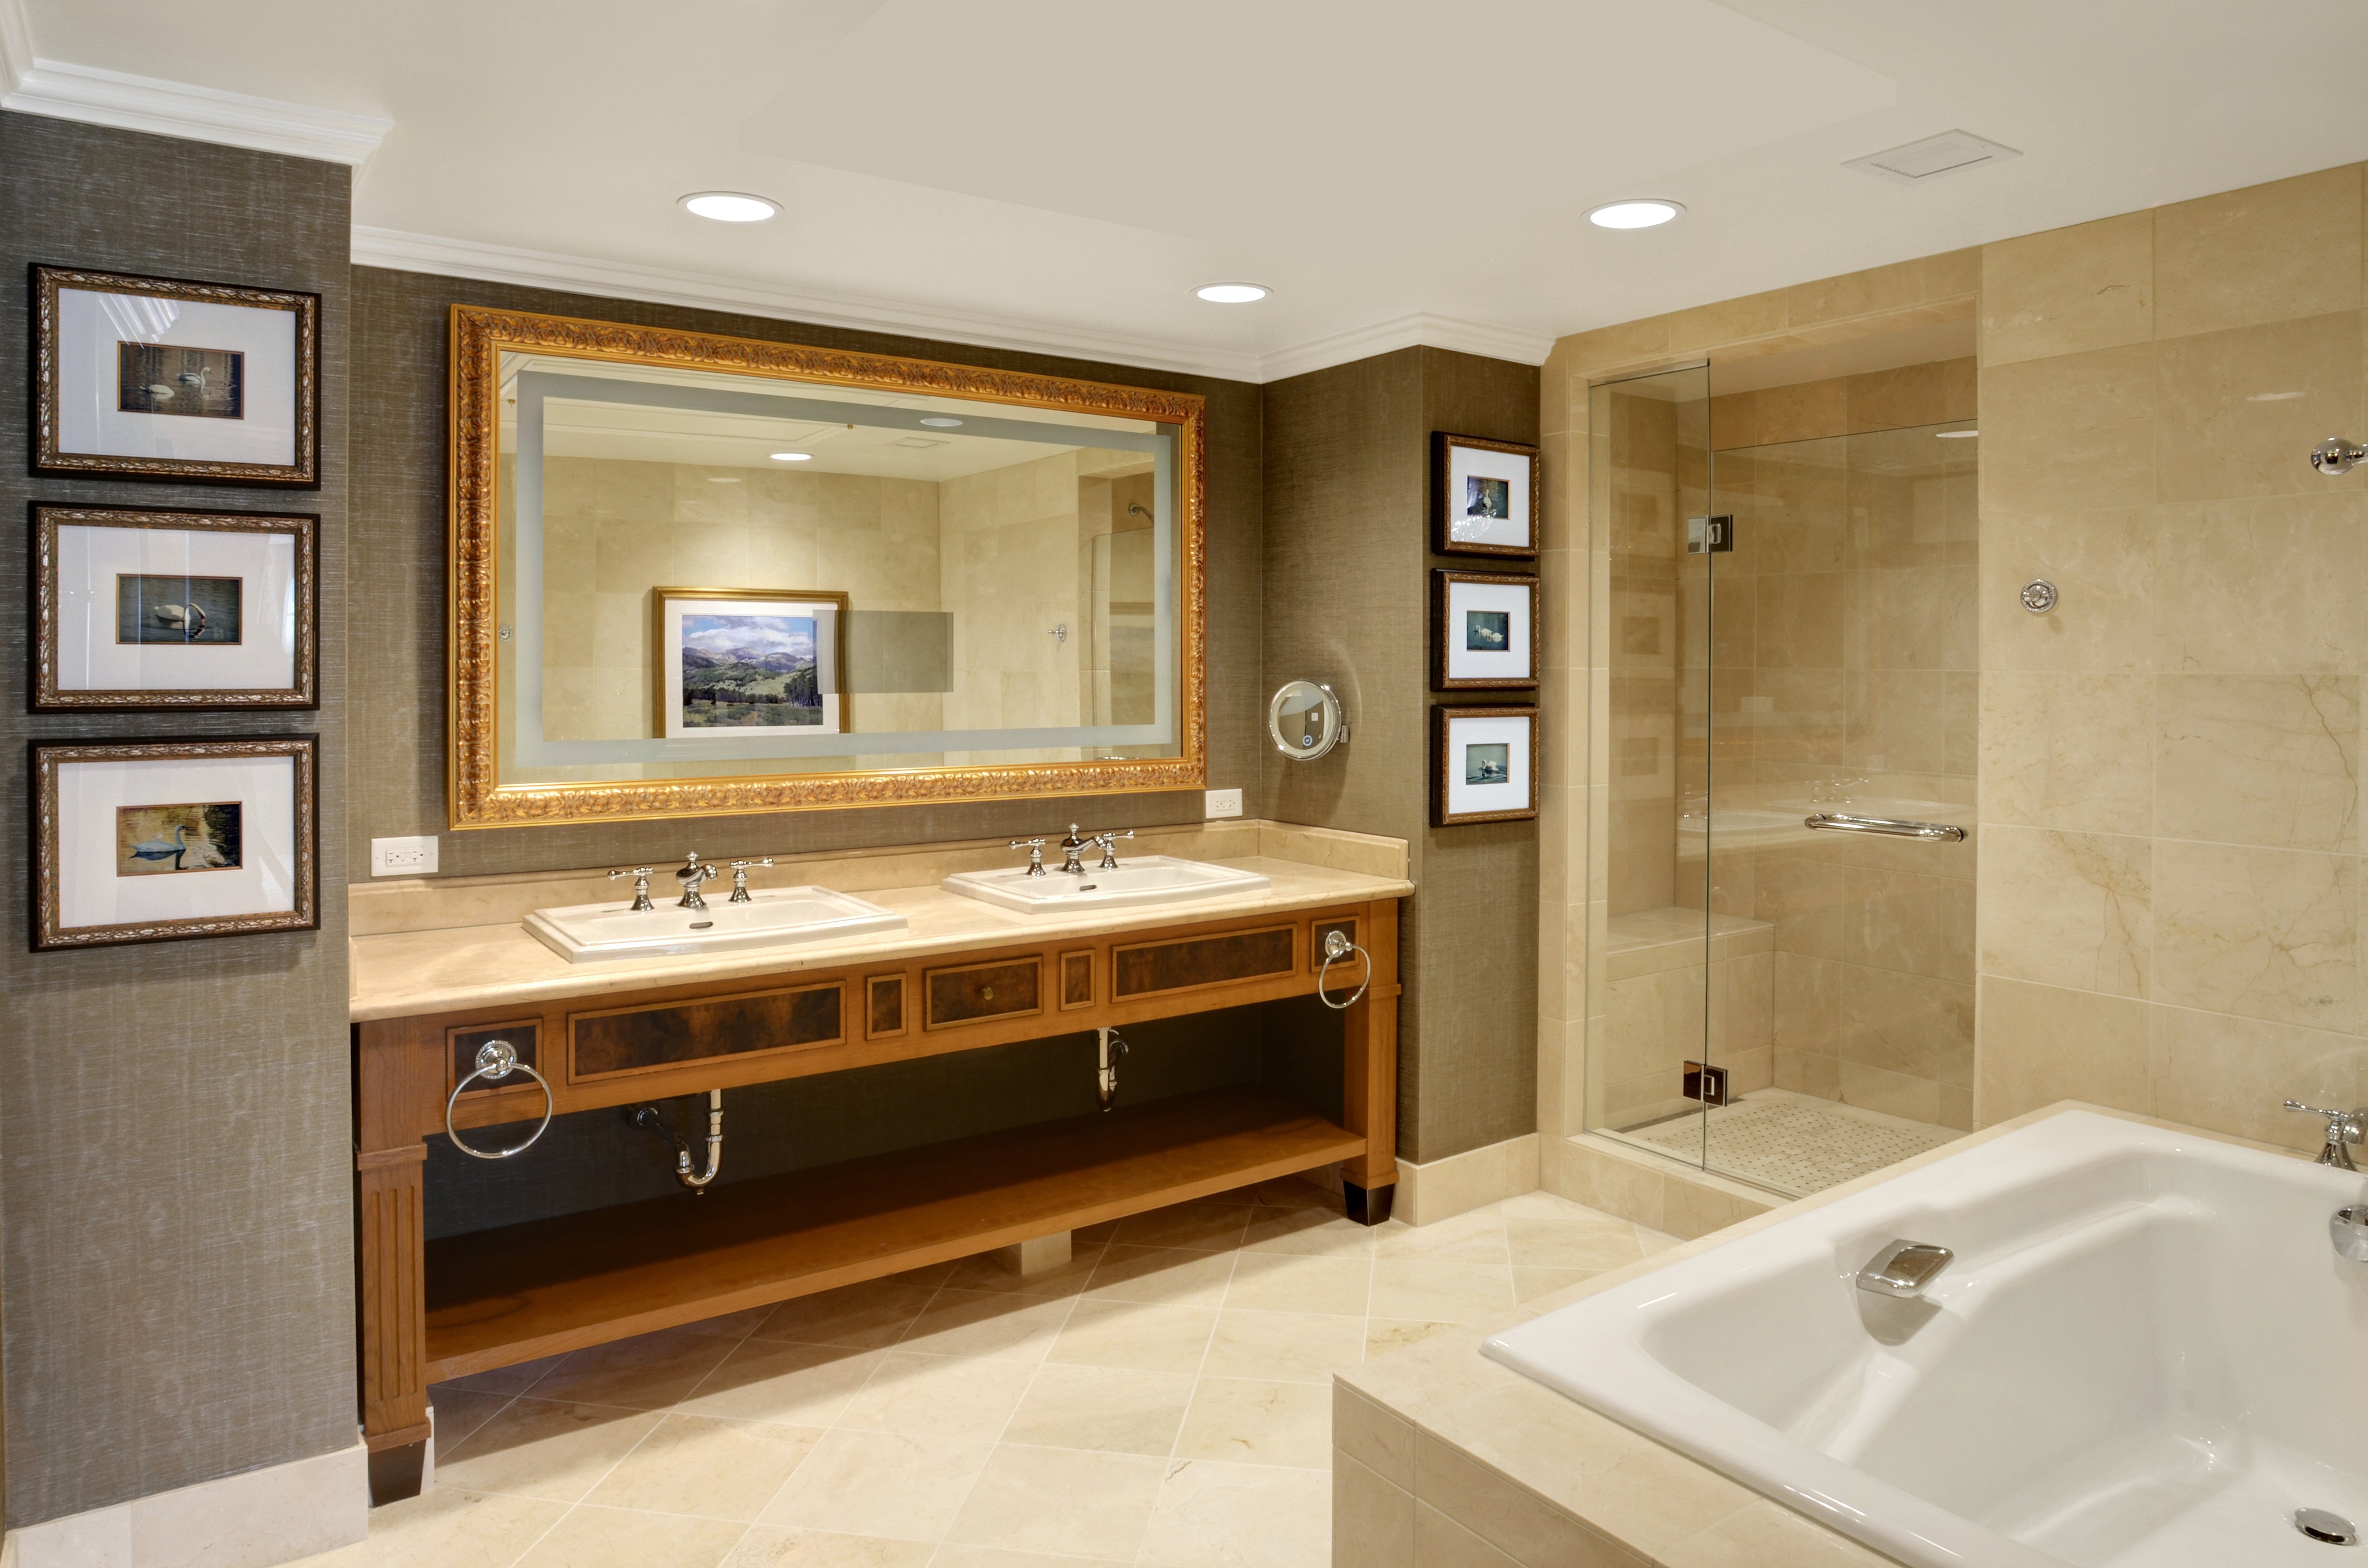 Oldcastle SurePods created the modular bathrooms for the Broadmoor Hotel in Colorado Springs Colo